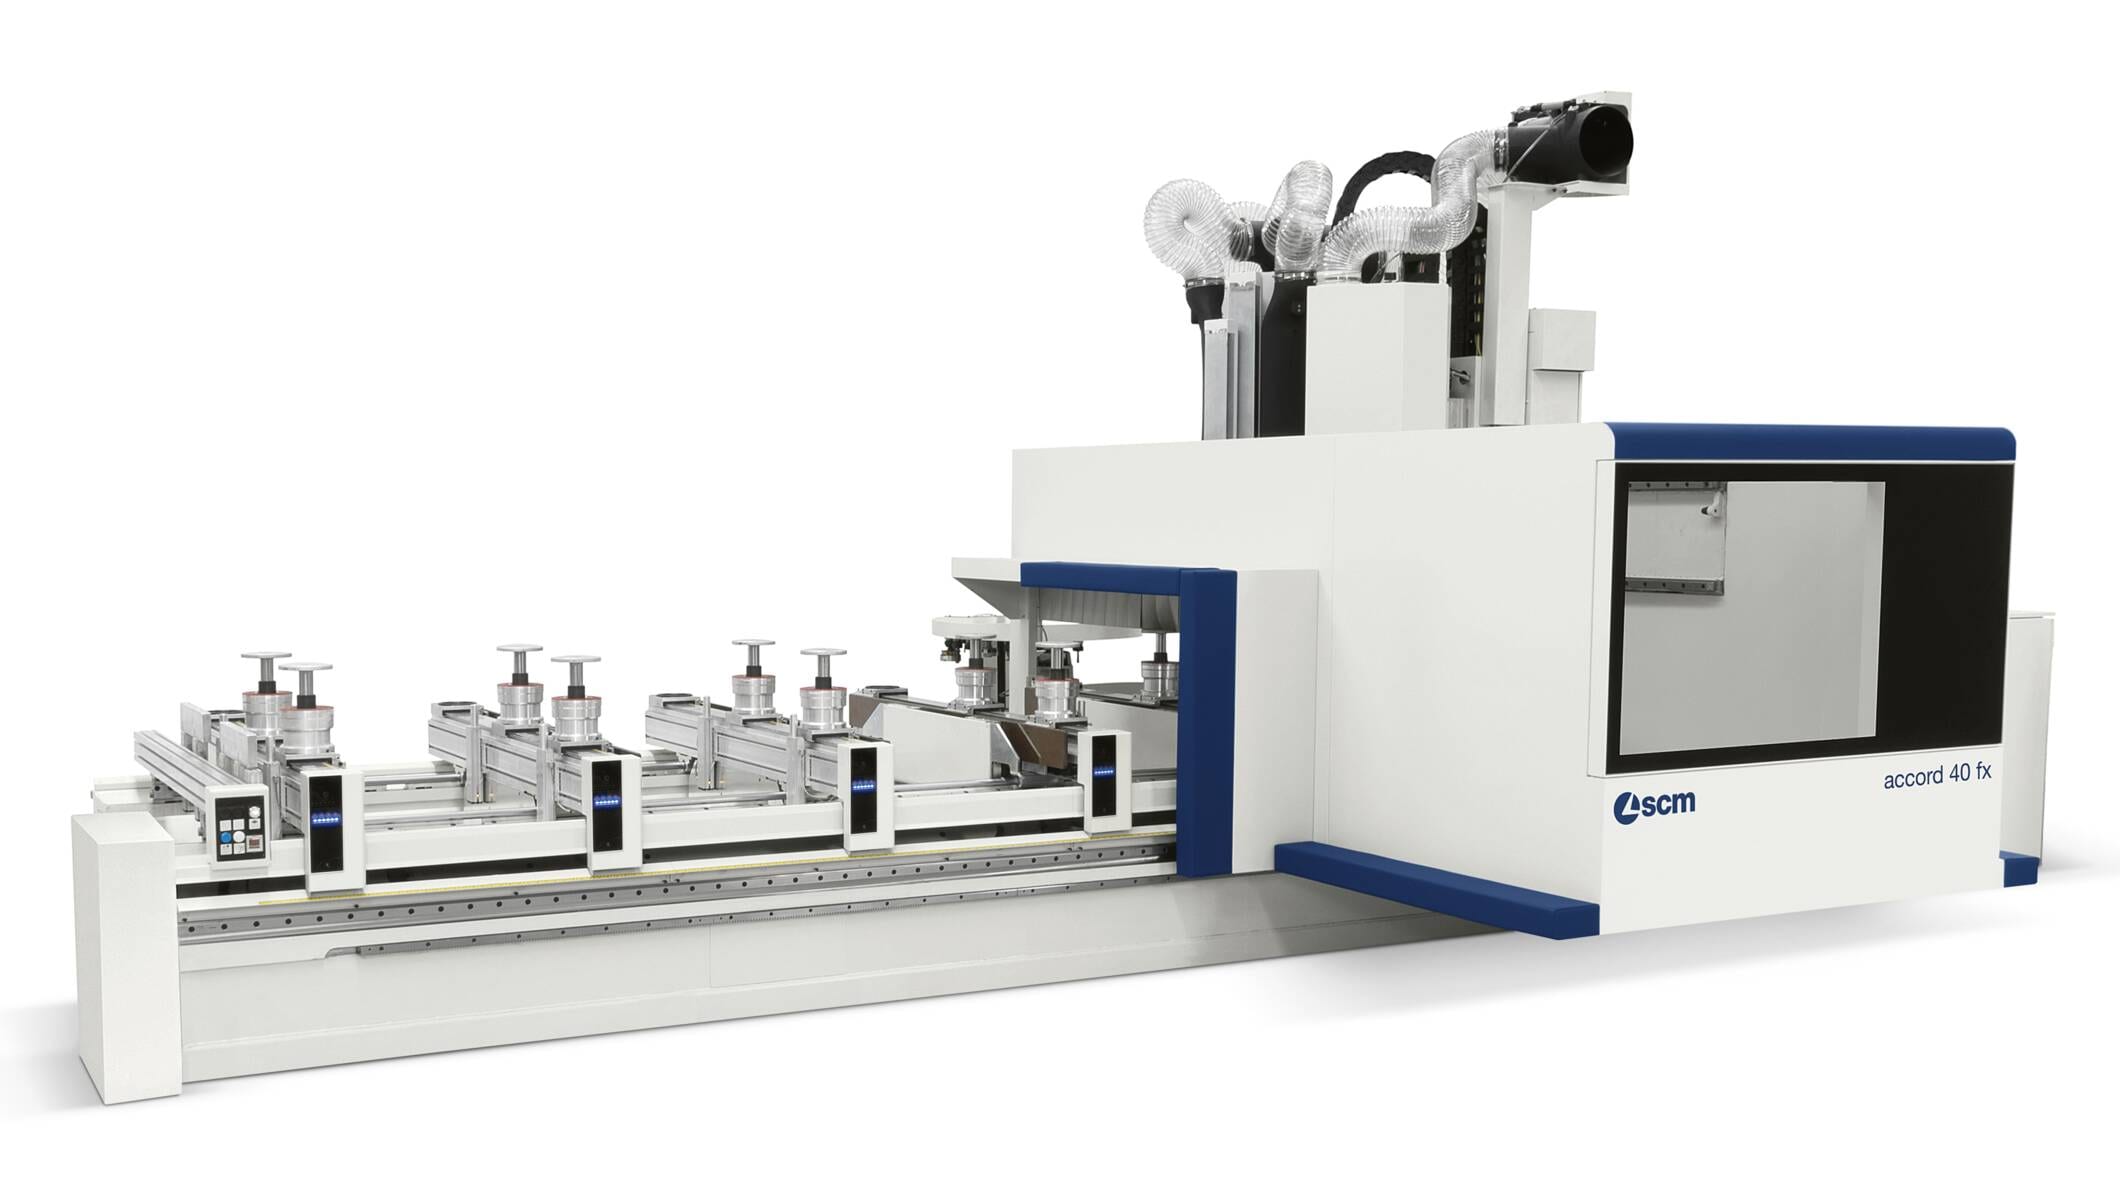 CNC Machining Centers - CNC Machining Centers for routing and drilling - accord 40 fx